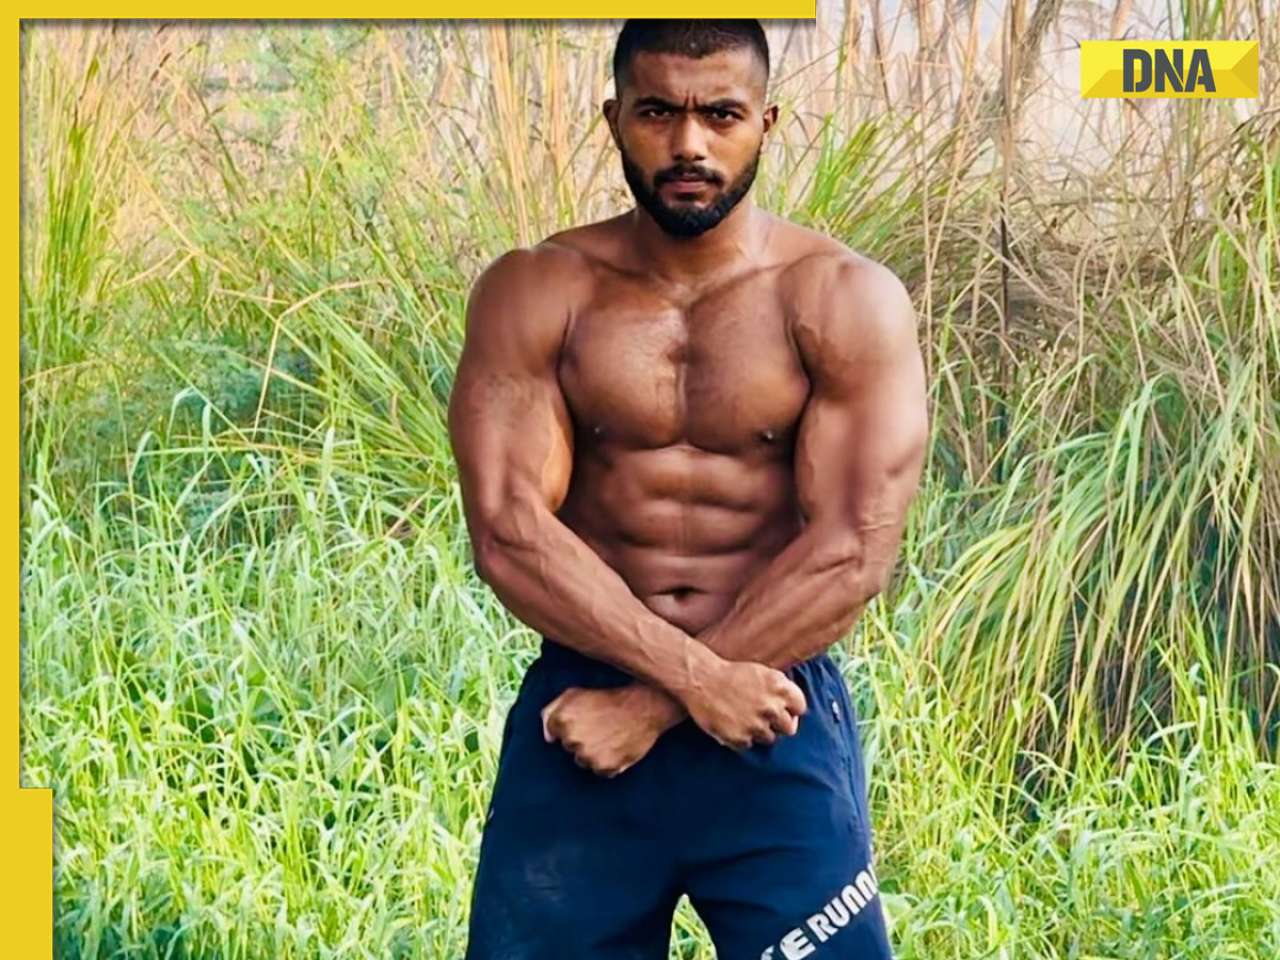 Meet Ankit Baiyanpuria, wrestler turned fitness influencer, who was awarded Best Health and Fitness Creator by PM Modi